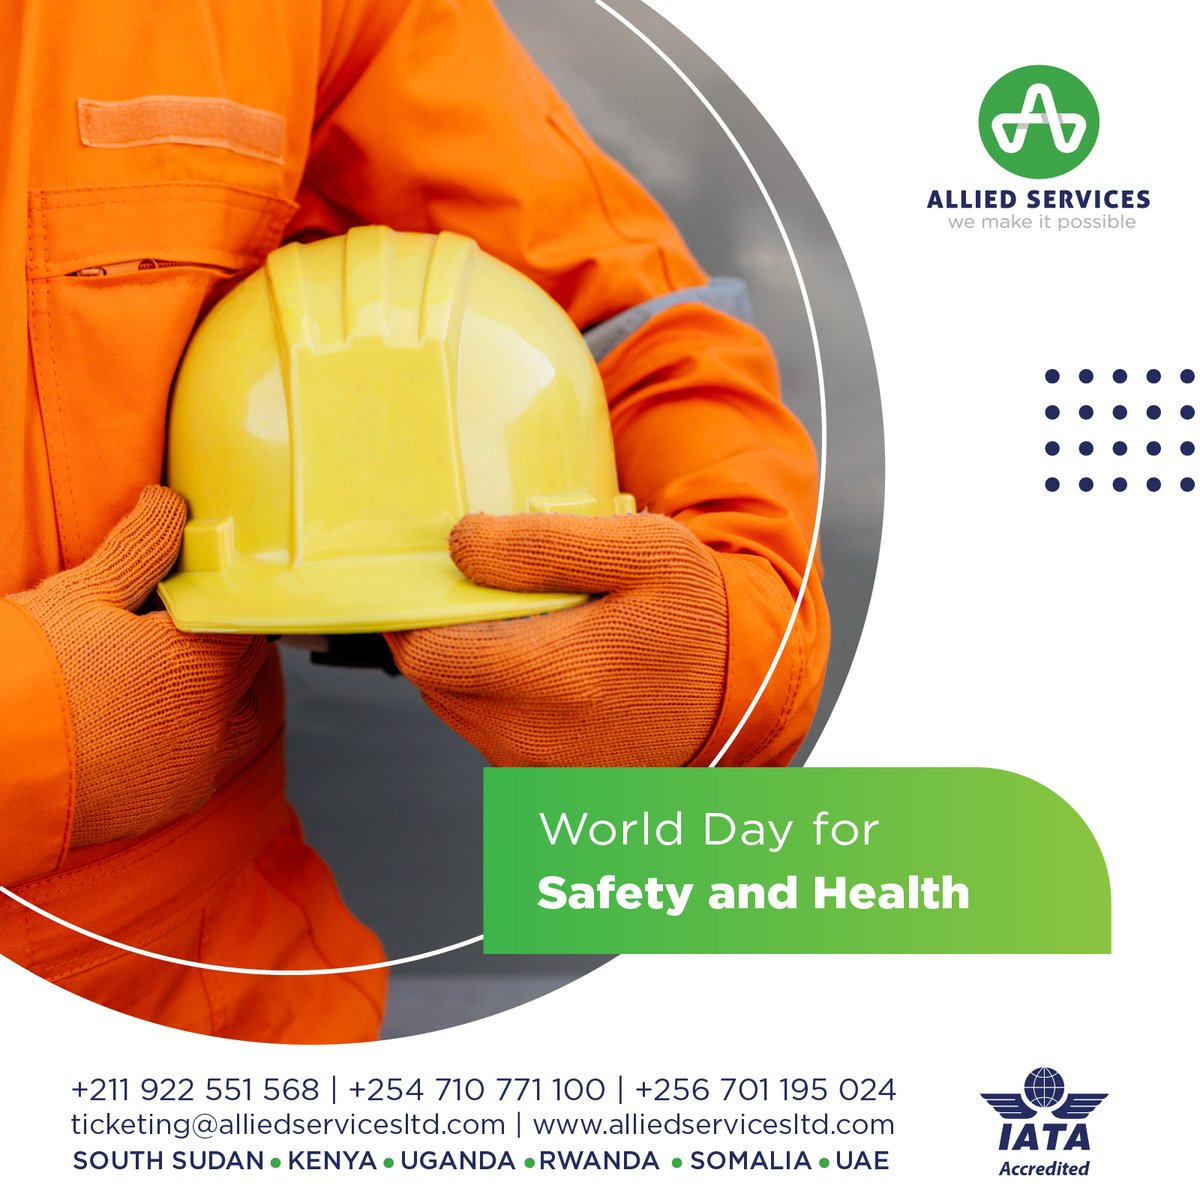 Today is #WorldDayforSafetyandHealth. As a transport and logistics company, we understand the importance of following proper safety procedures to ensure the well-being of everyone involved in our operations.

#AlliedServices #SSOT